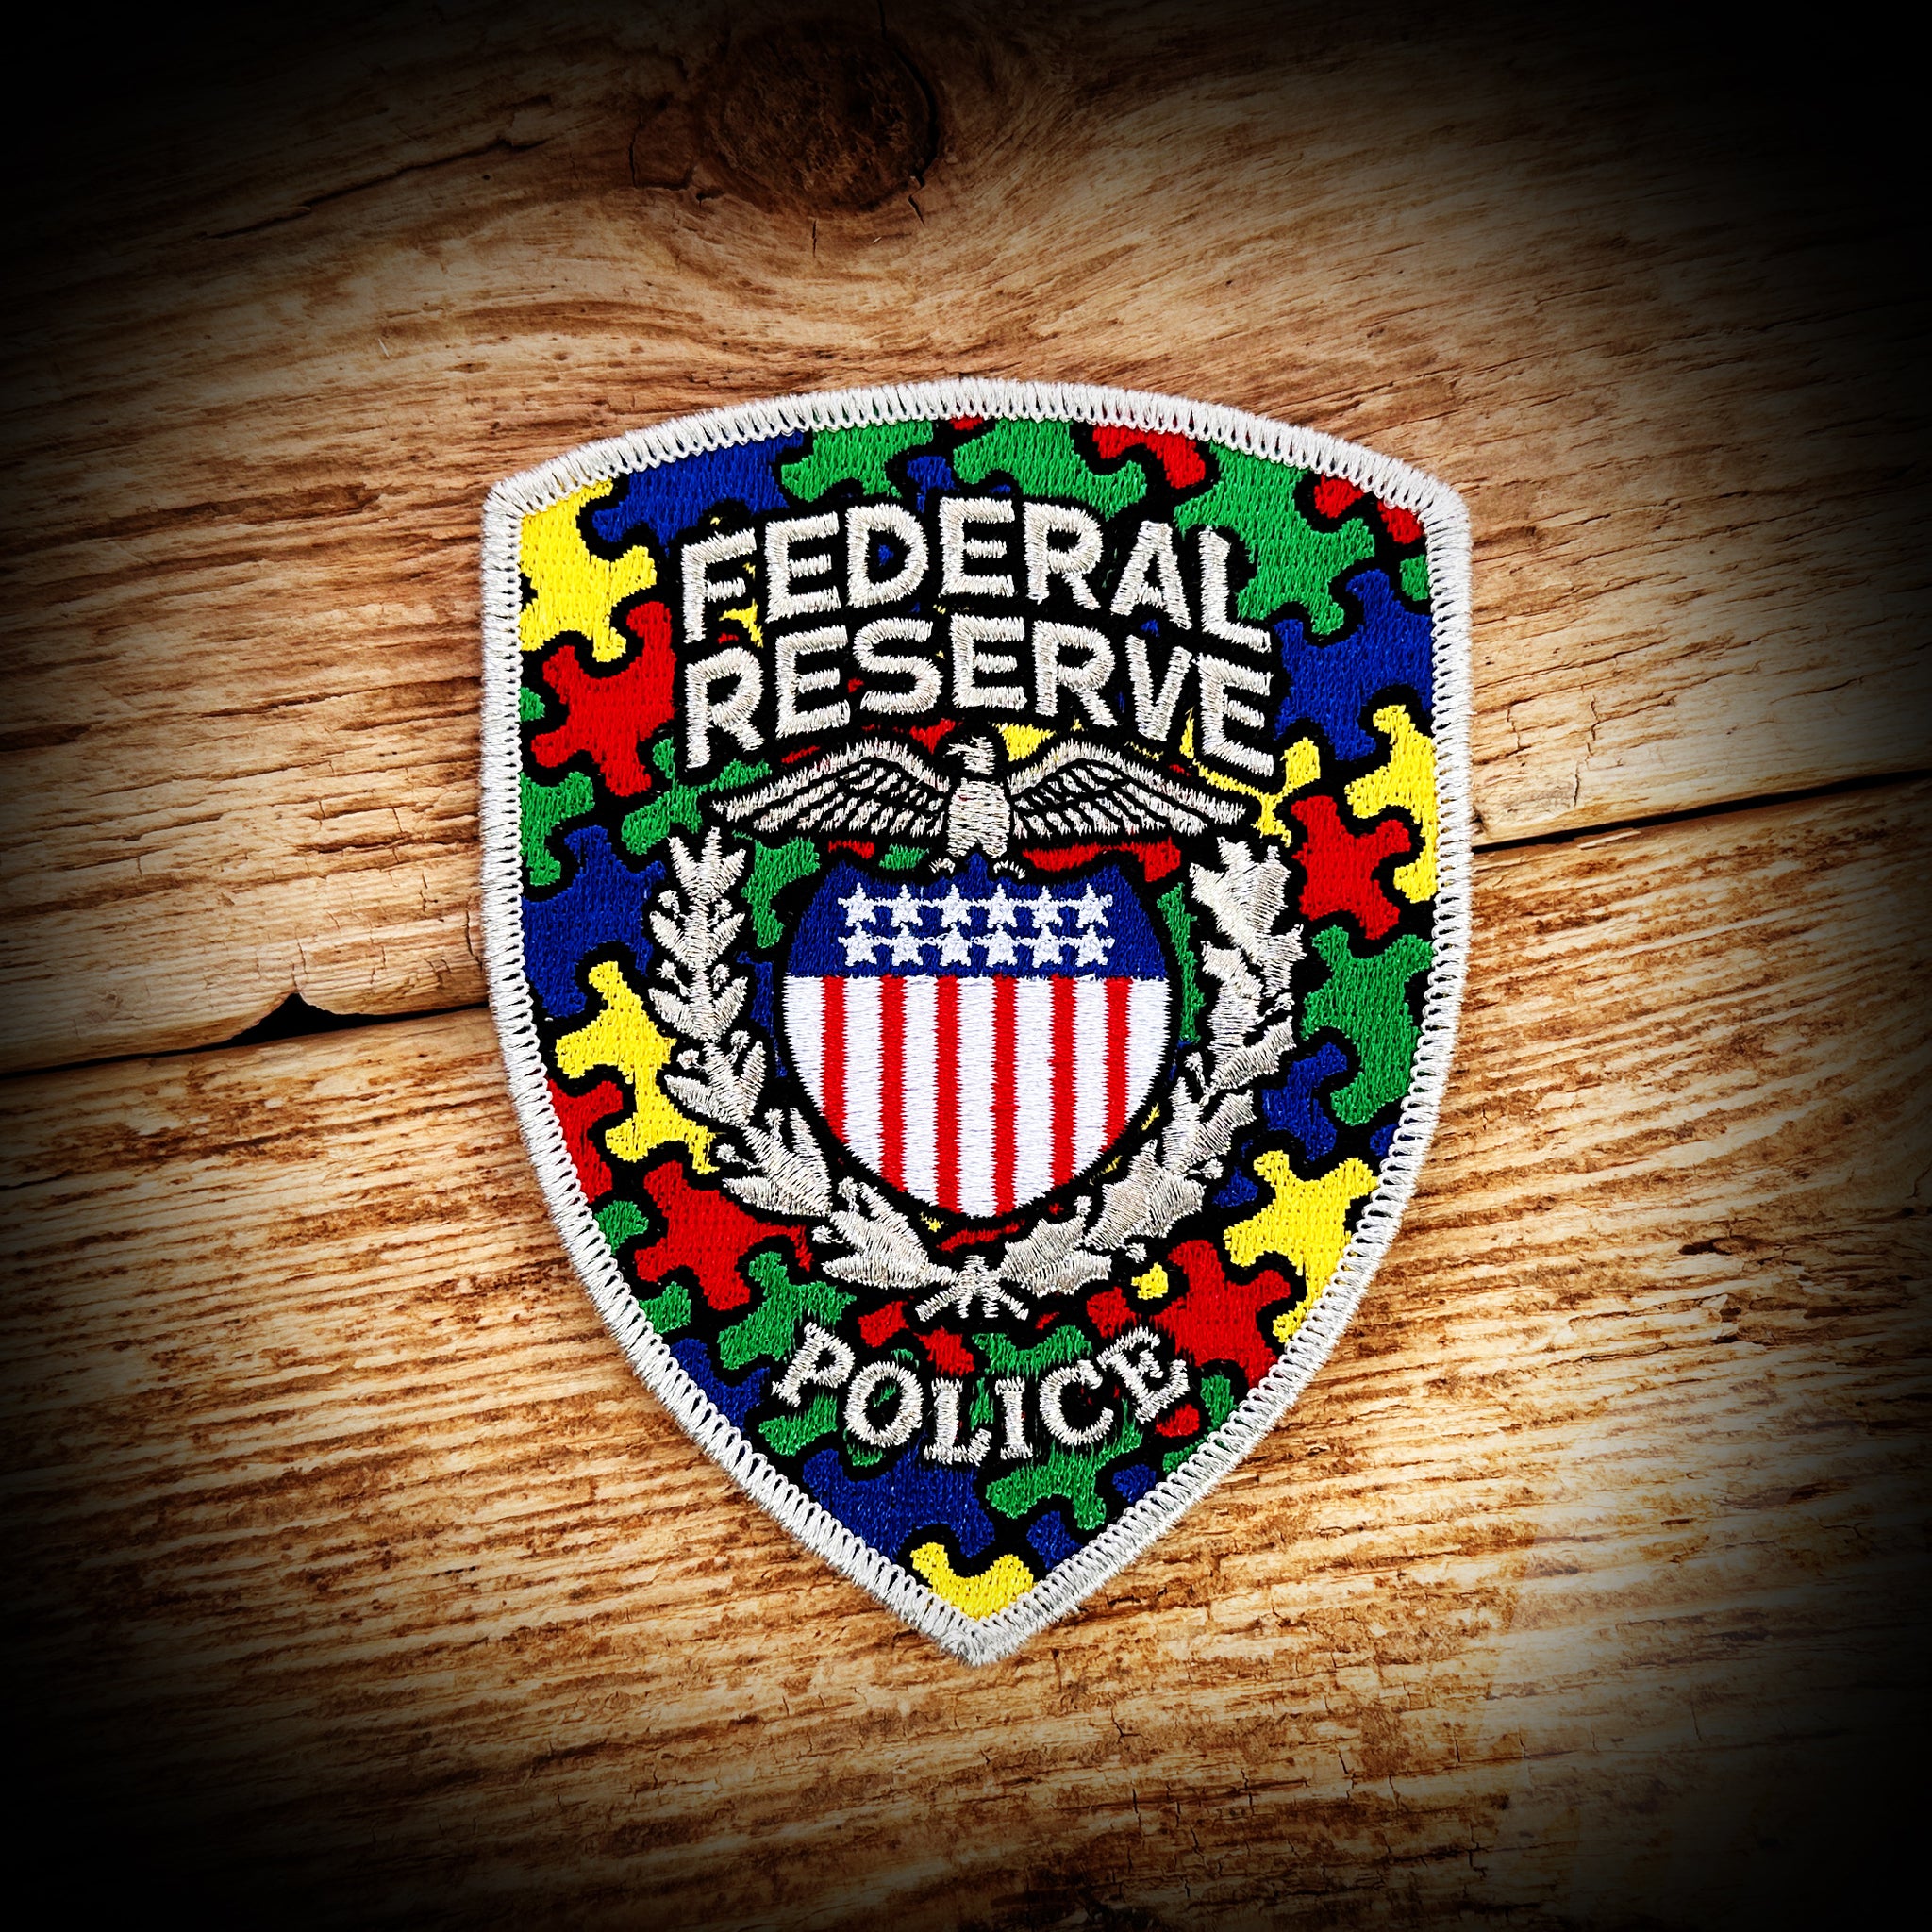 Federal Reserve Police Department - Autism Fundraiser - Authentic